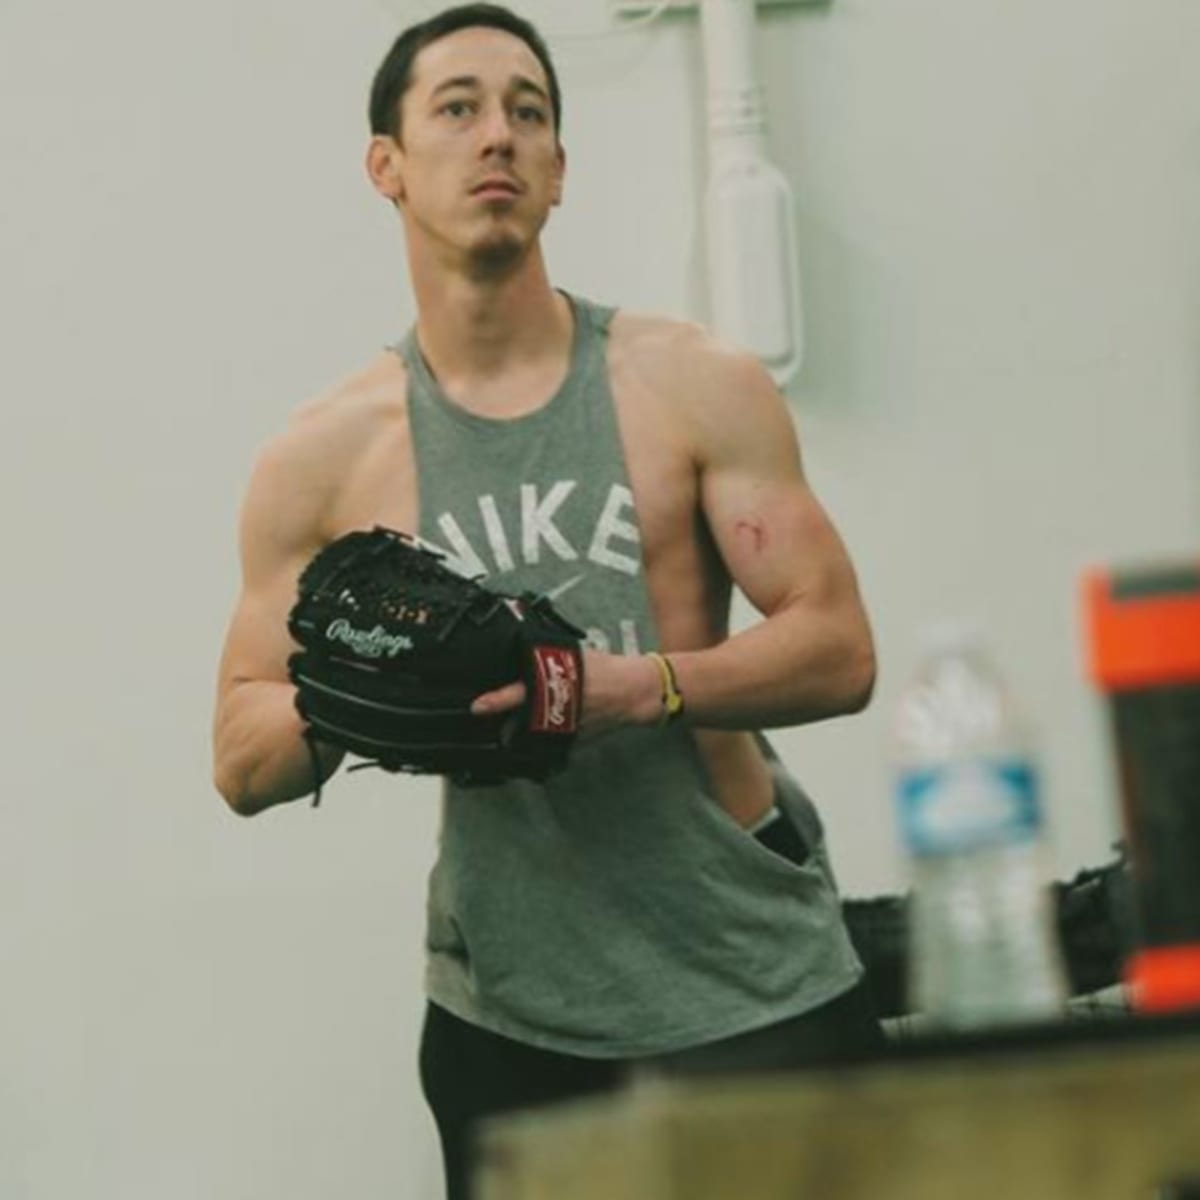 Tim Lincecum gets a haircut, proceeds to get racked by Rockies